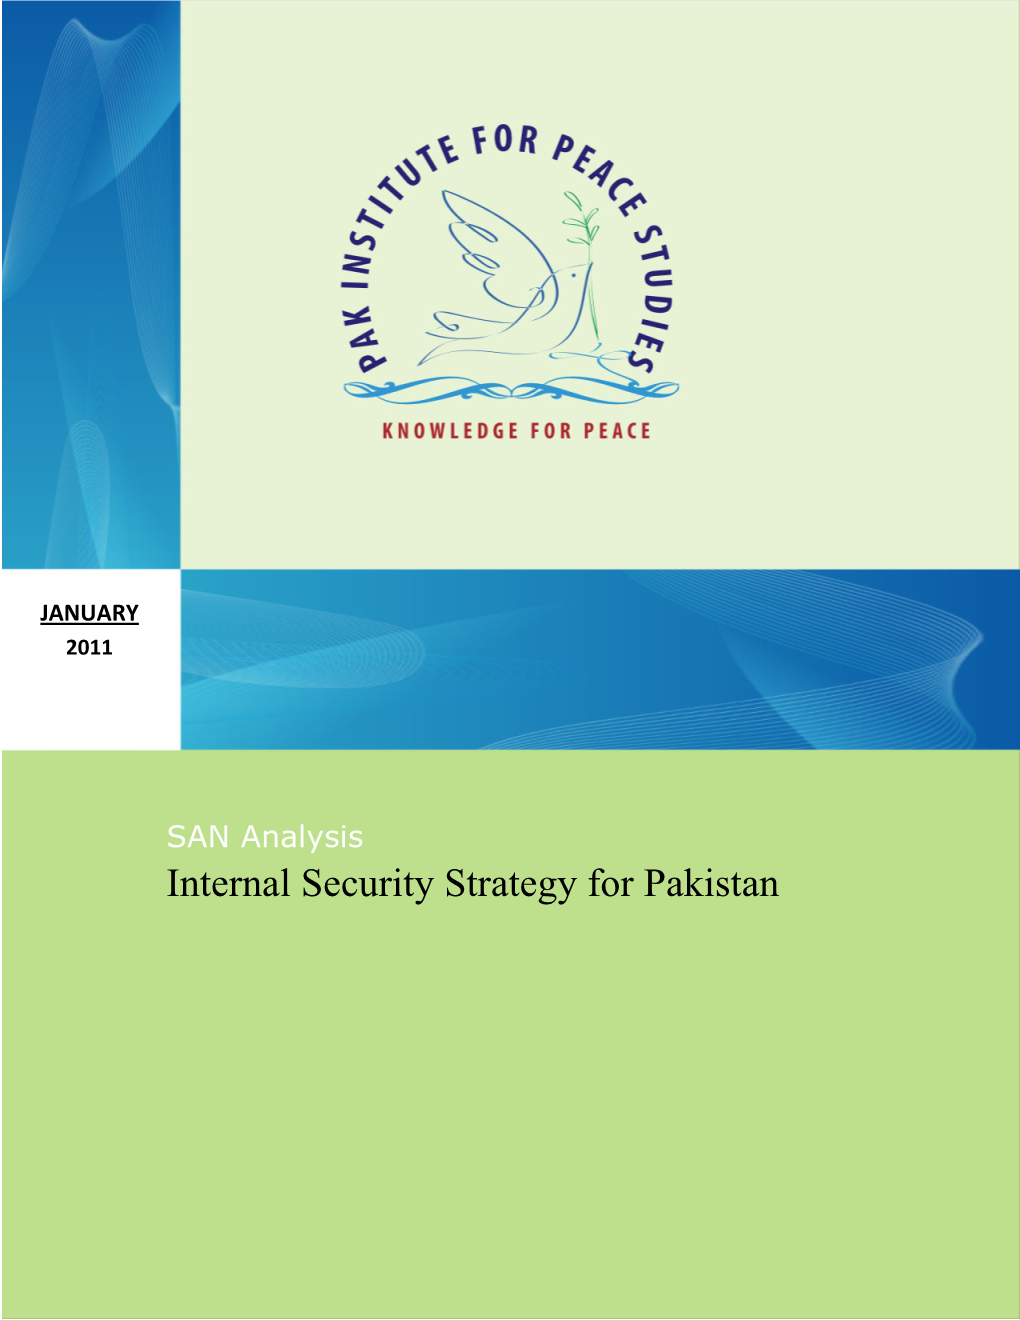 Internal Security Strategy for Pakistan